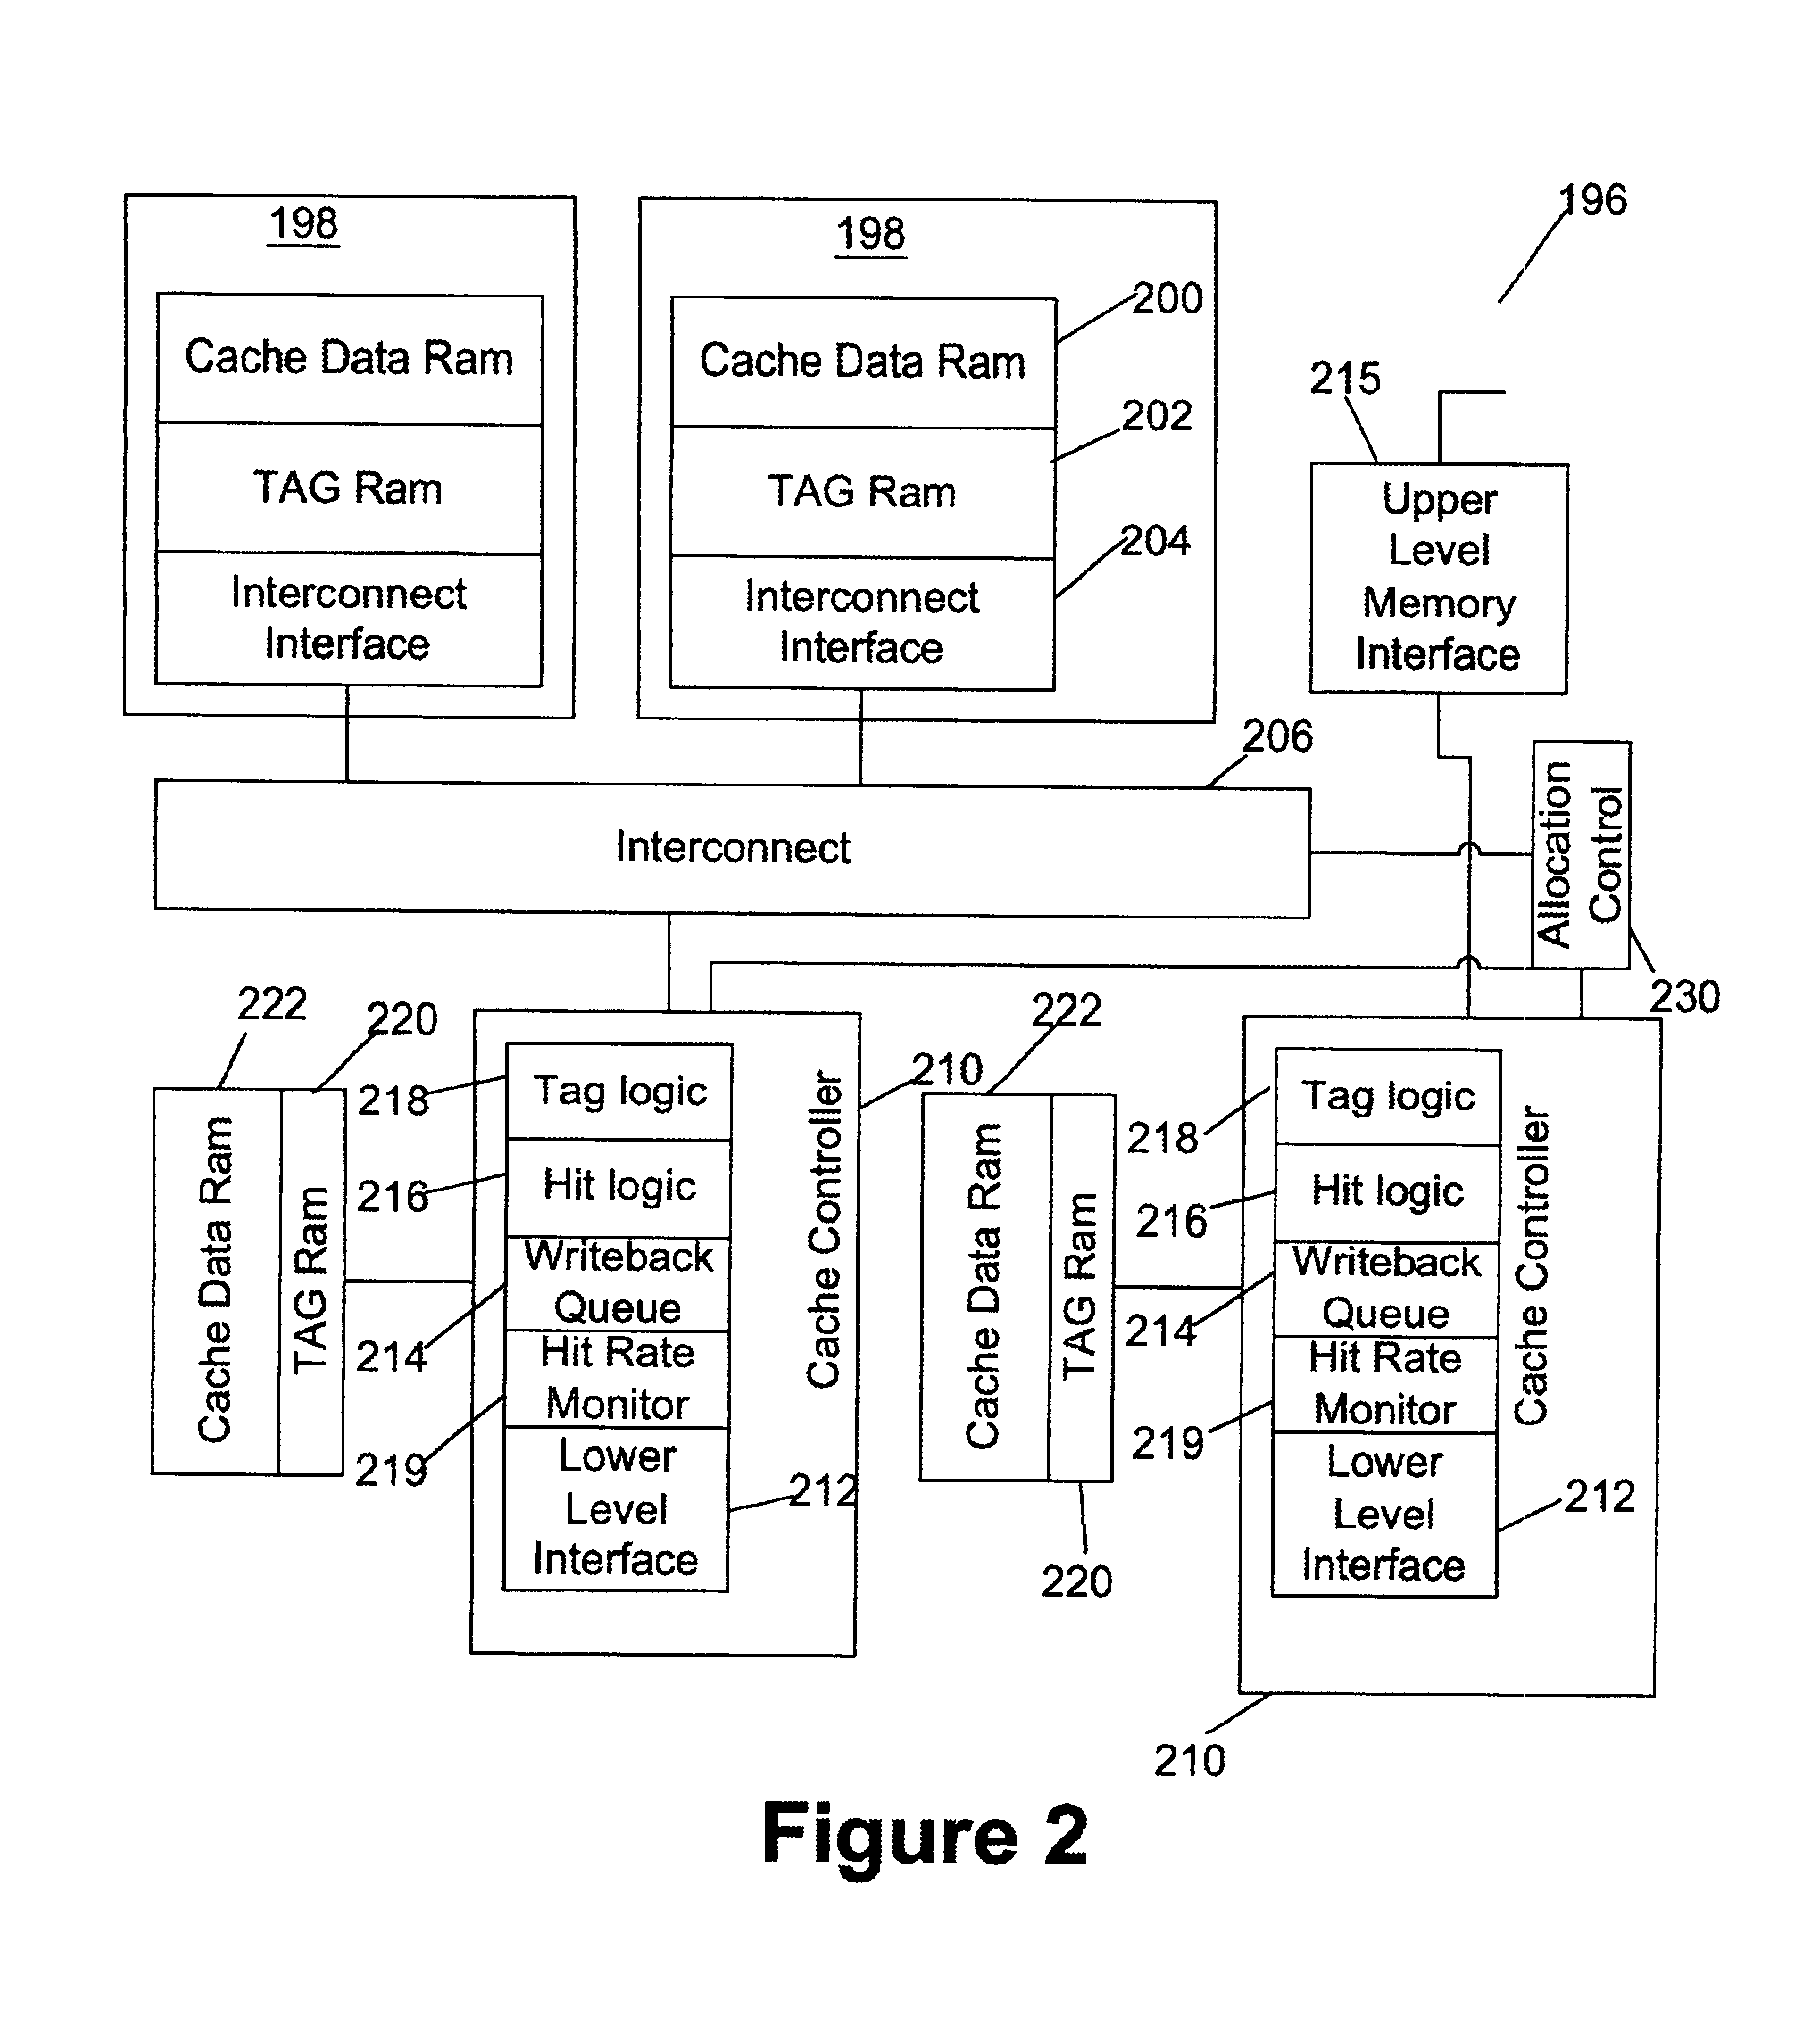 System and method for dynamic processor core and cache partitioning on large-scale multithreaded, multiprocessor integrated circuits